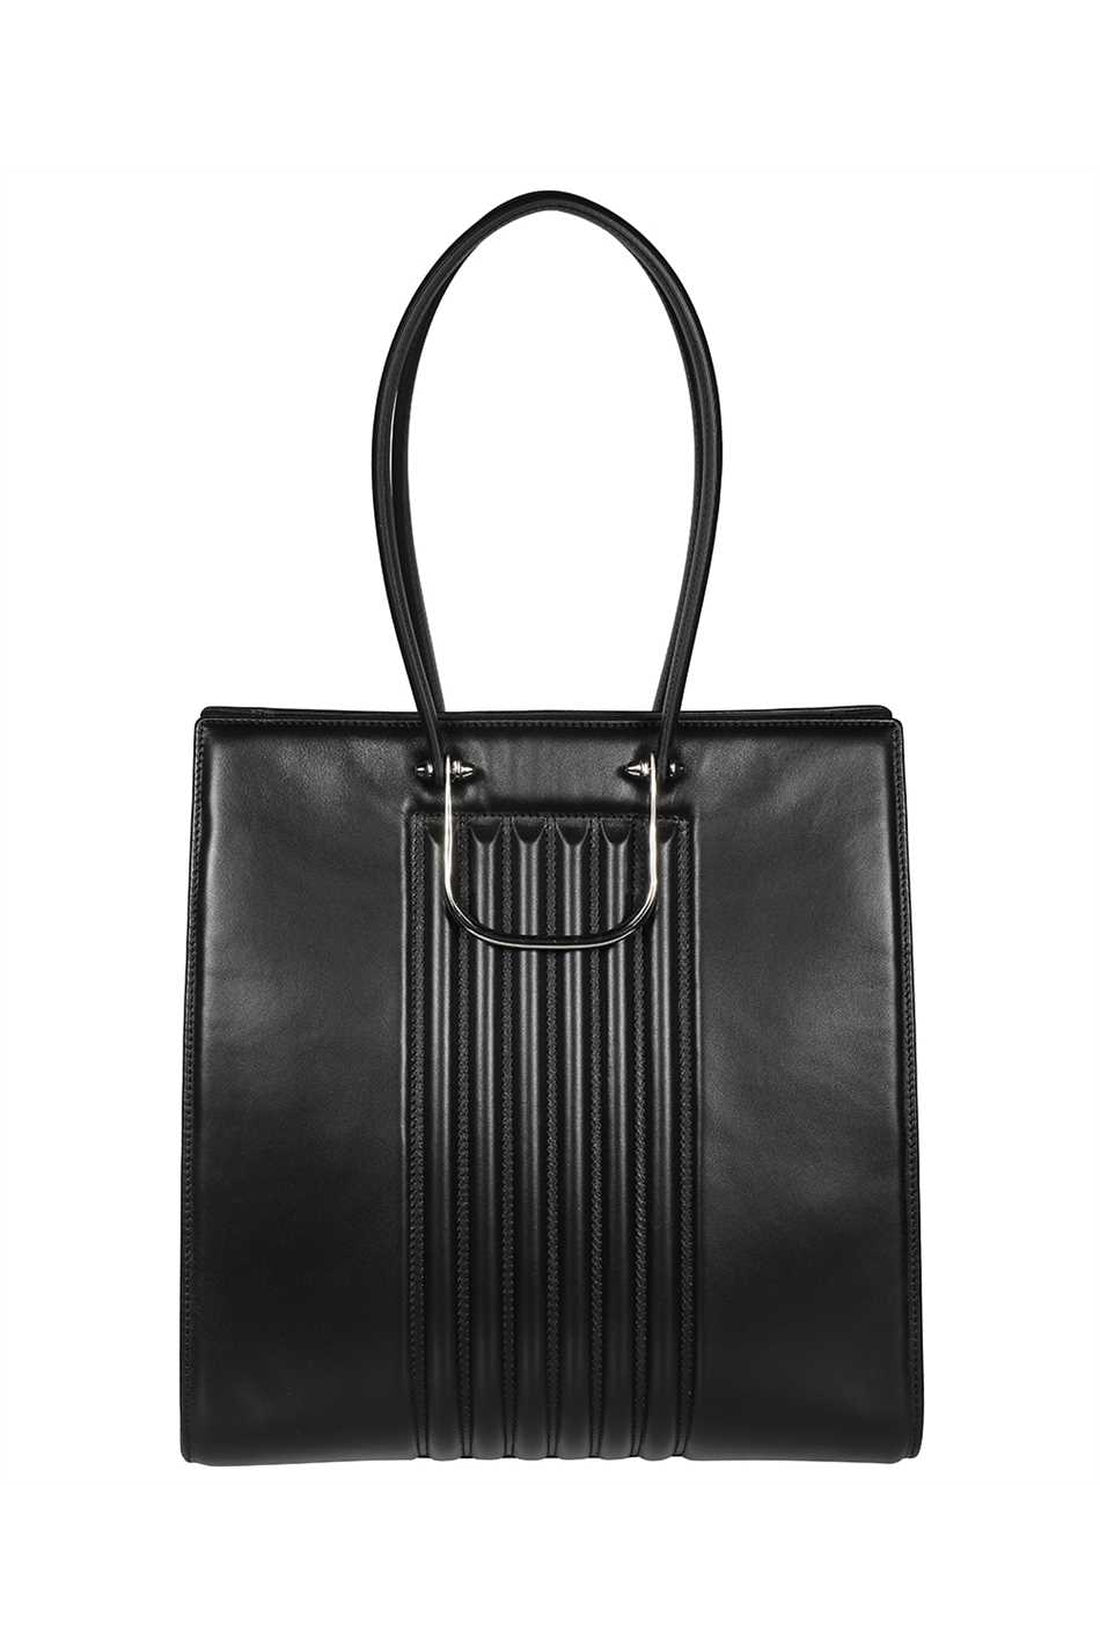 Alexander McQueen-OUTLET-SALE-The Tall Story leather bag-ARCHIVIST